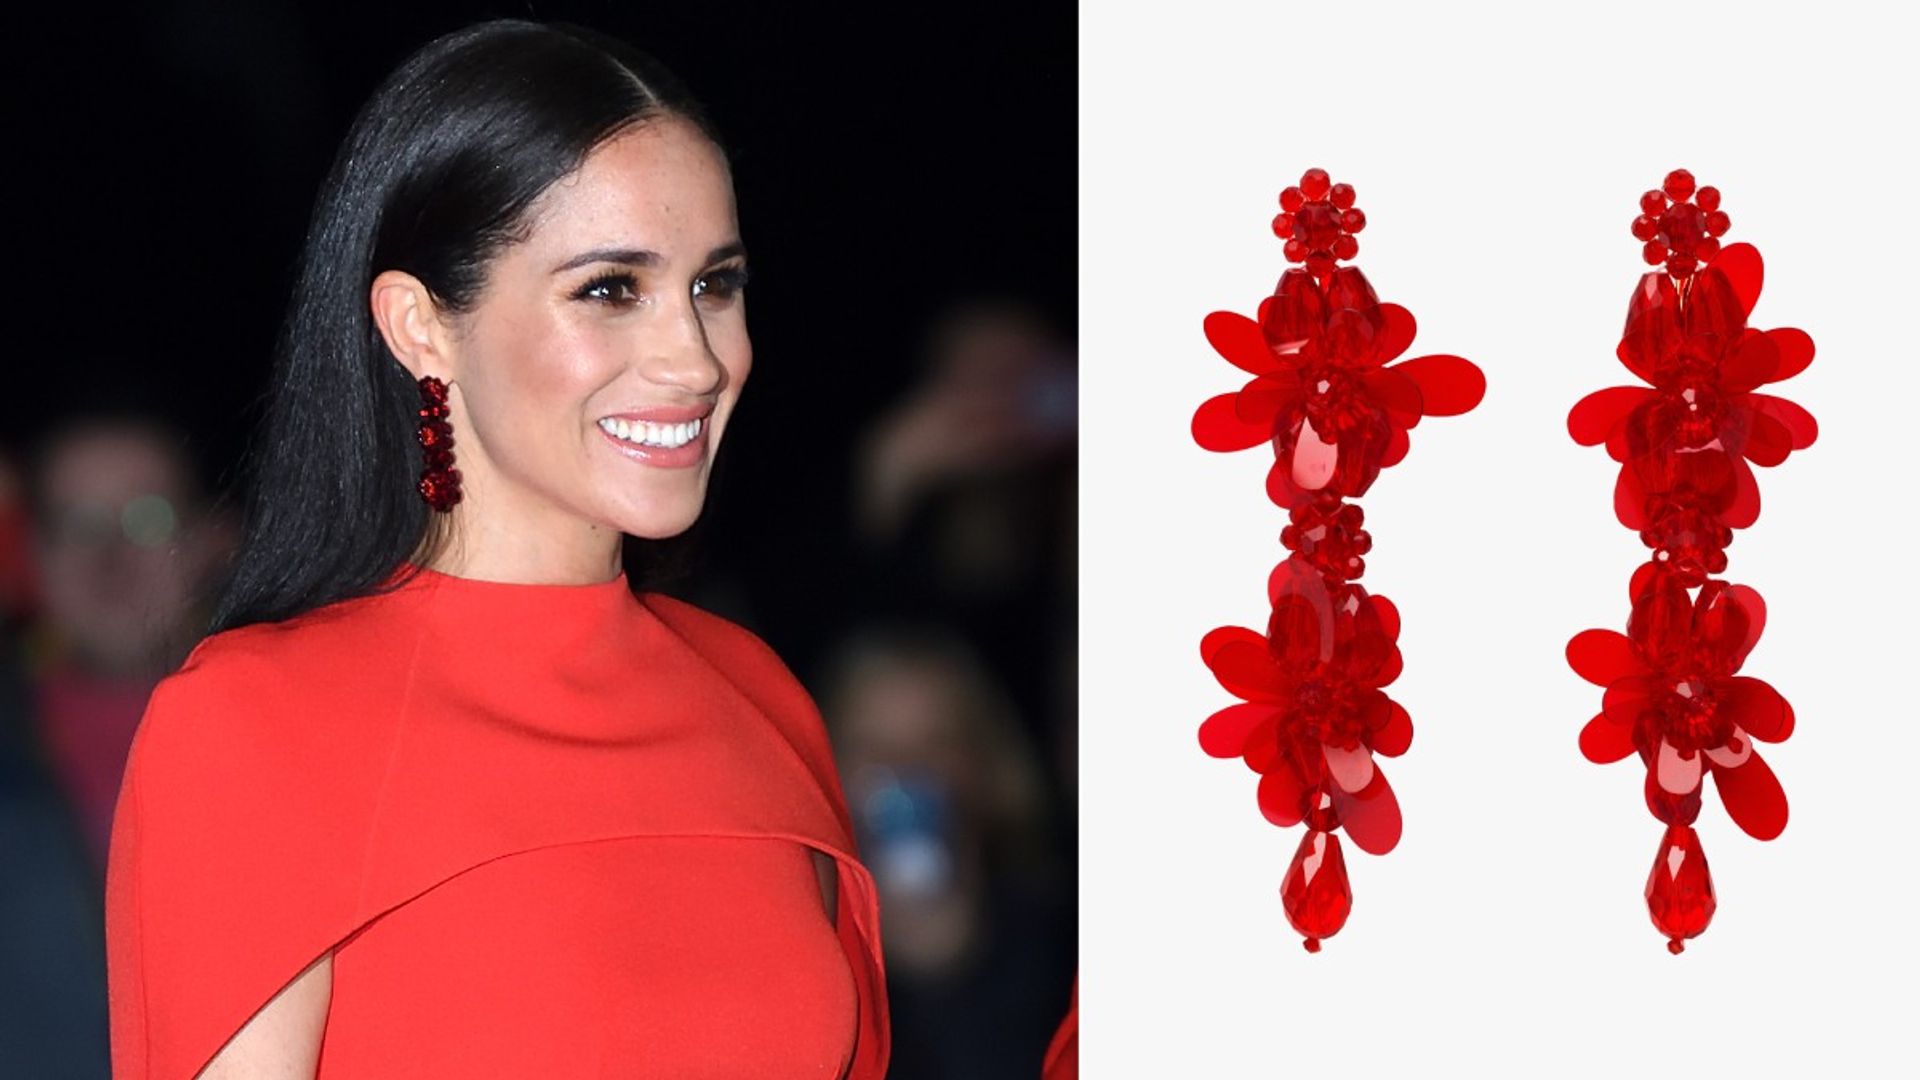 H&M's Simone Rocha earrings are exactly like Meghan Markle's - for just £34.99